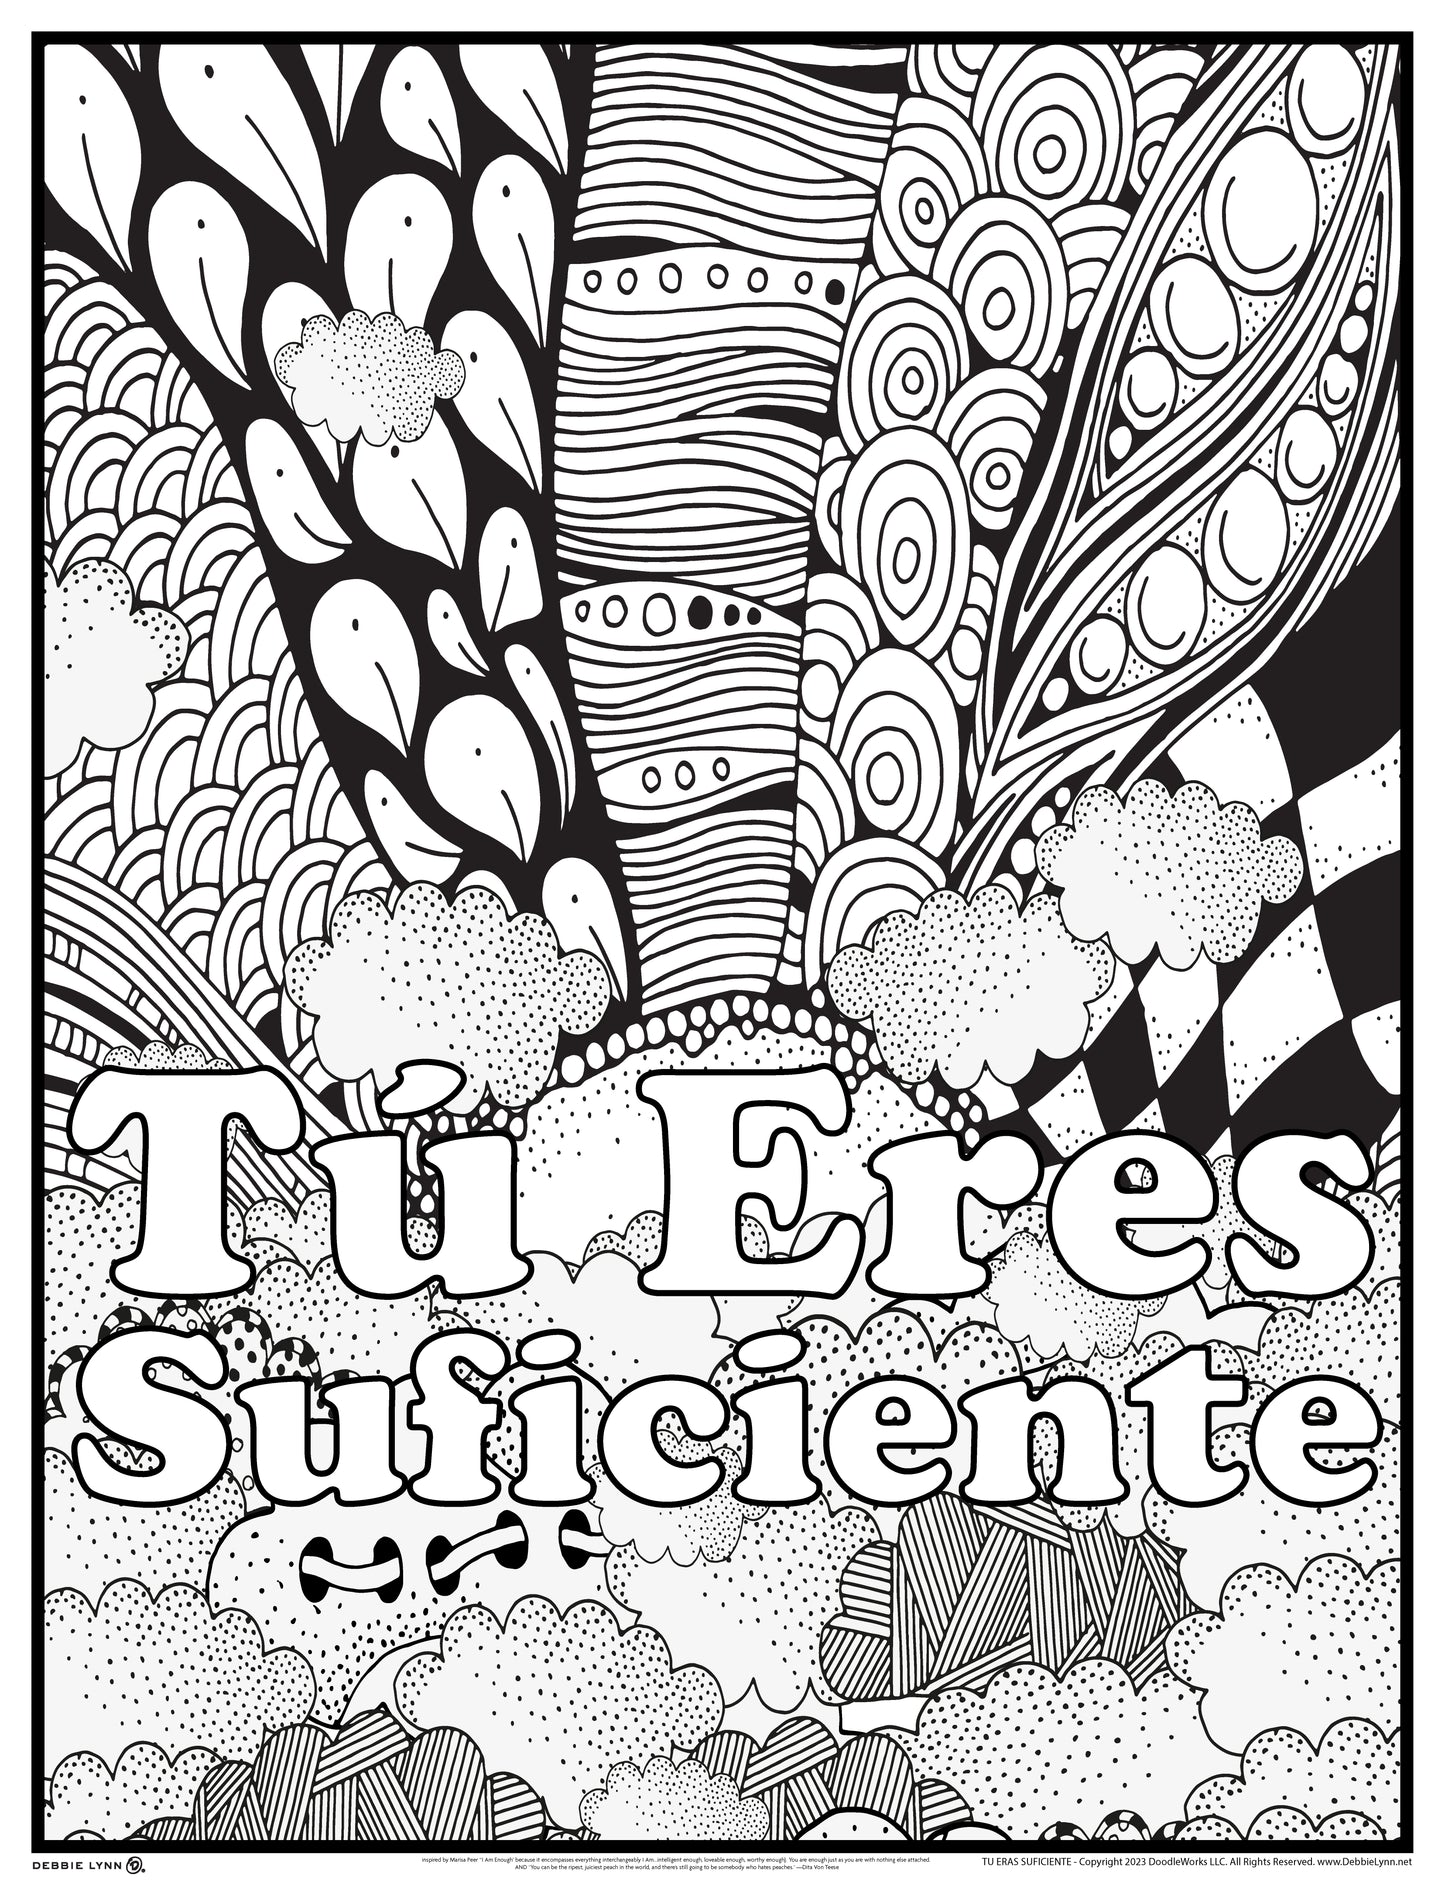 Tú Eres Suficiente Personalized Giant Coloring Poster 46x60"